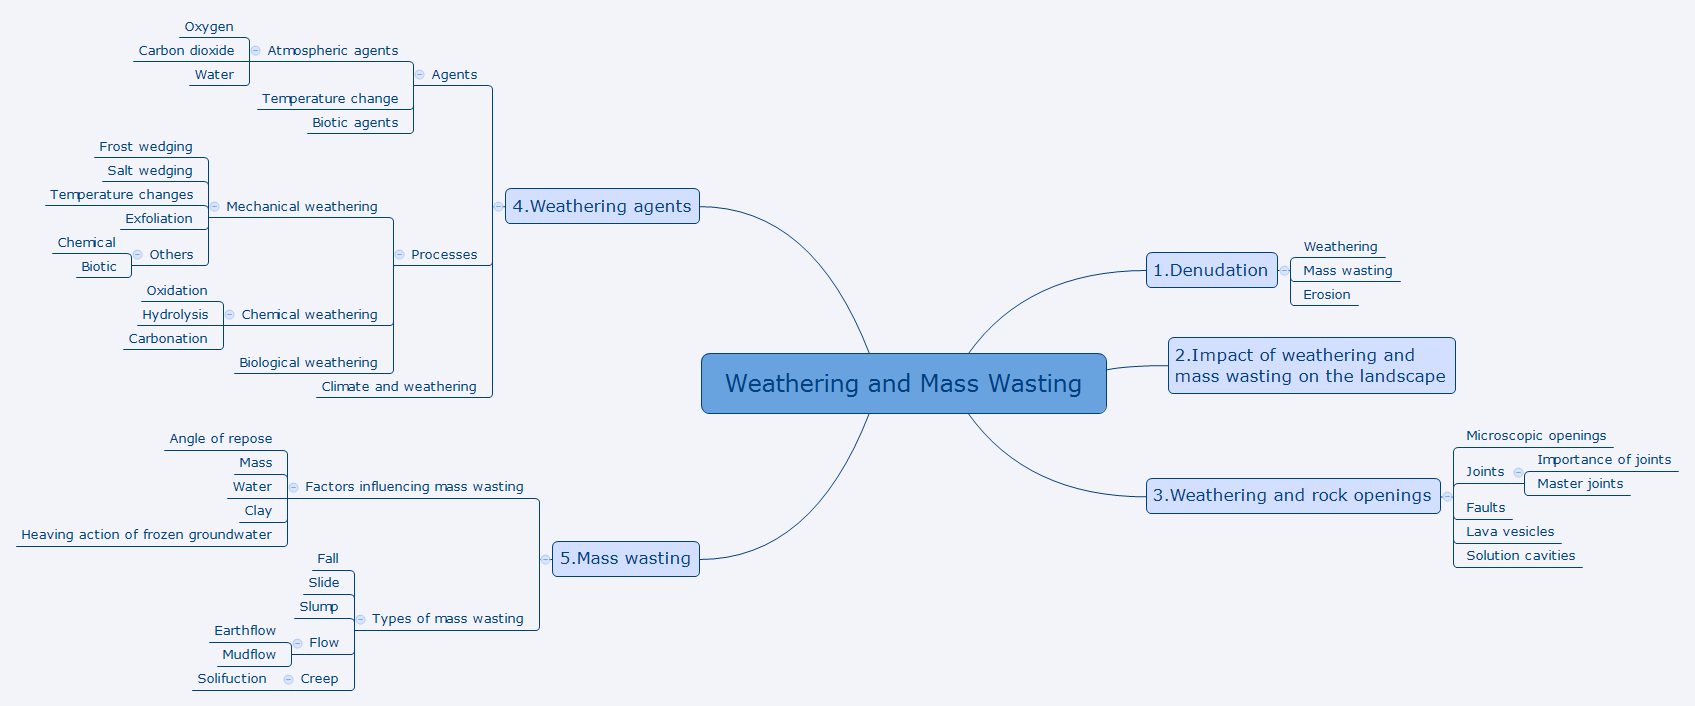 Weathering and Mass Wasting